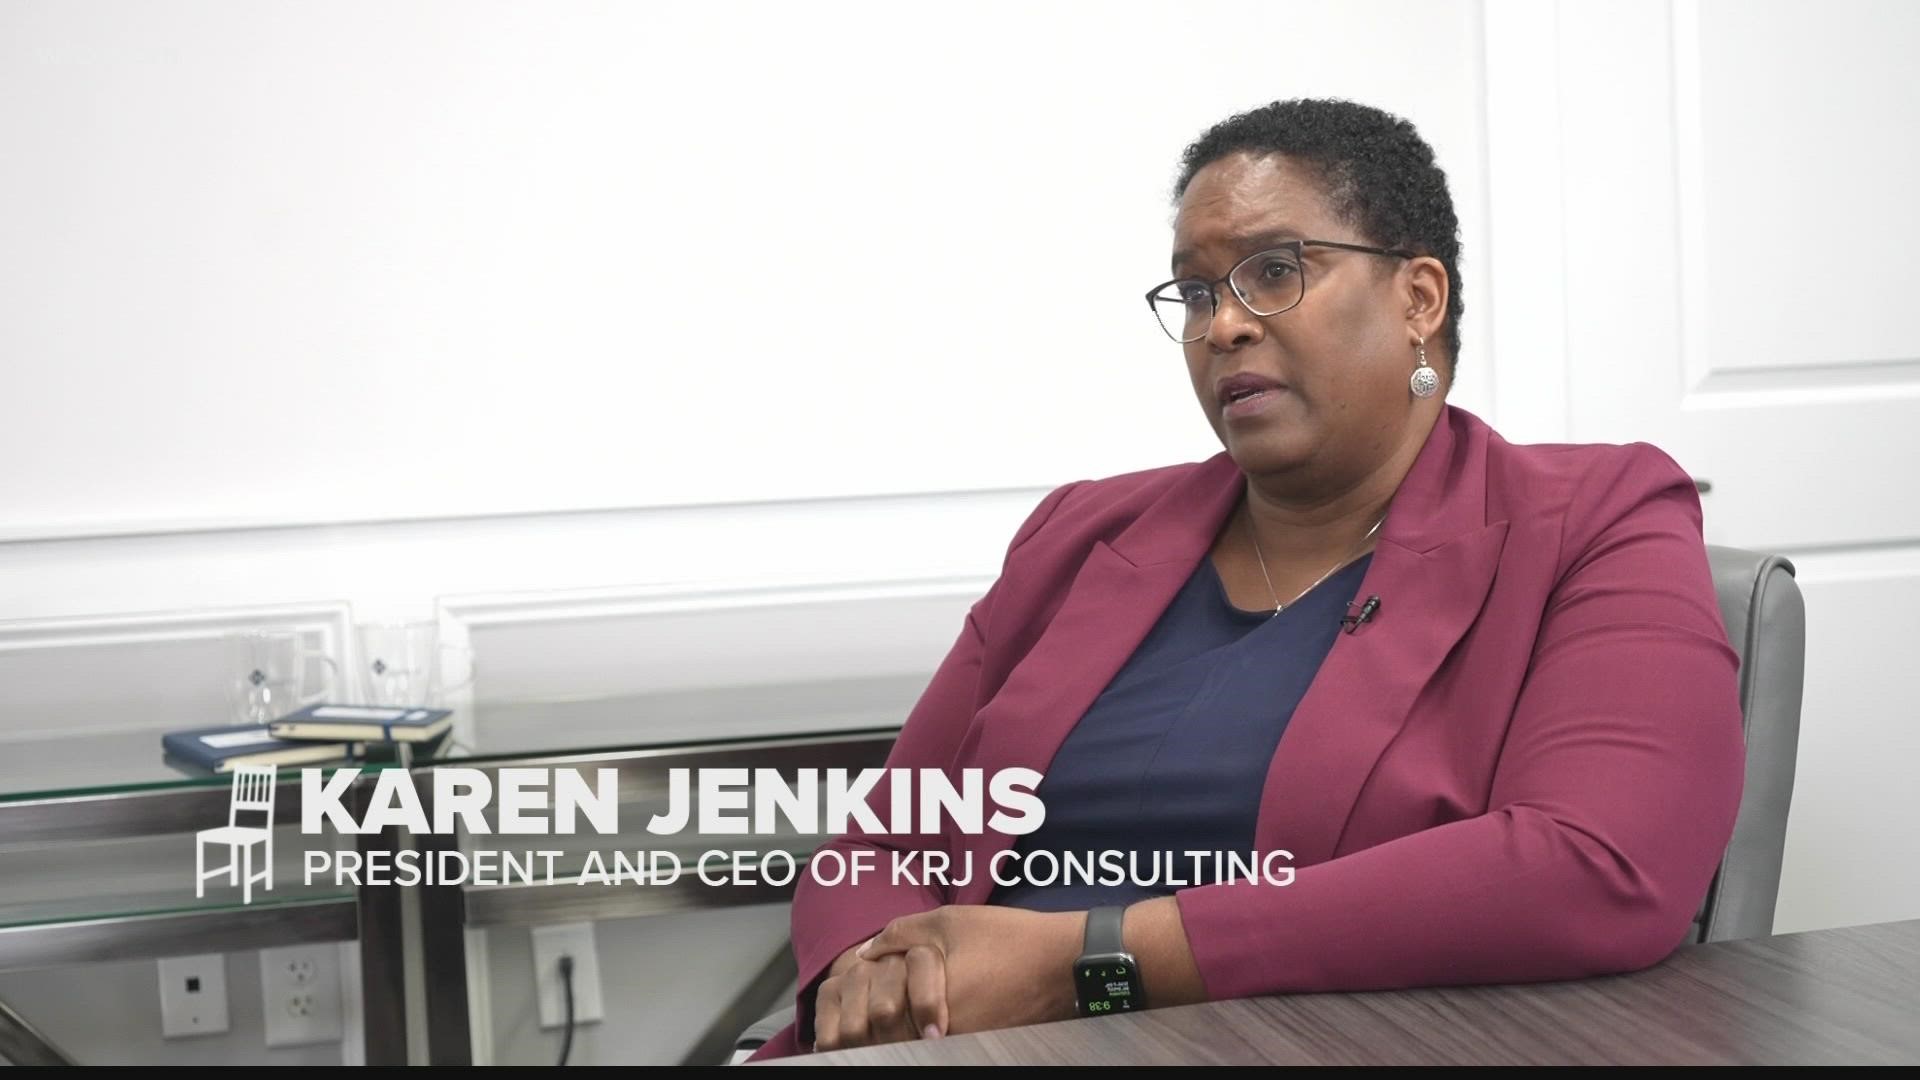 Karen Jenkins, President and CEO of KRJ Consulting, has been named Chair-Elect of the Columbia Chamber of Commerce. She's the 1st black woman to hold this position.